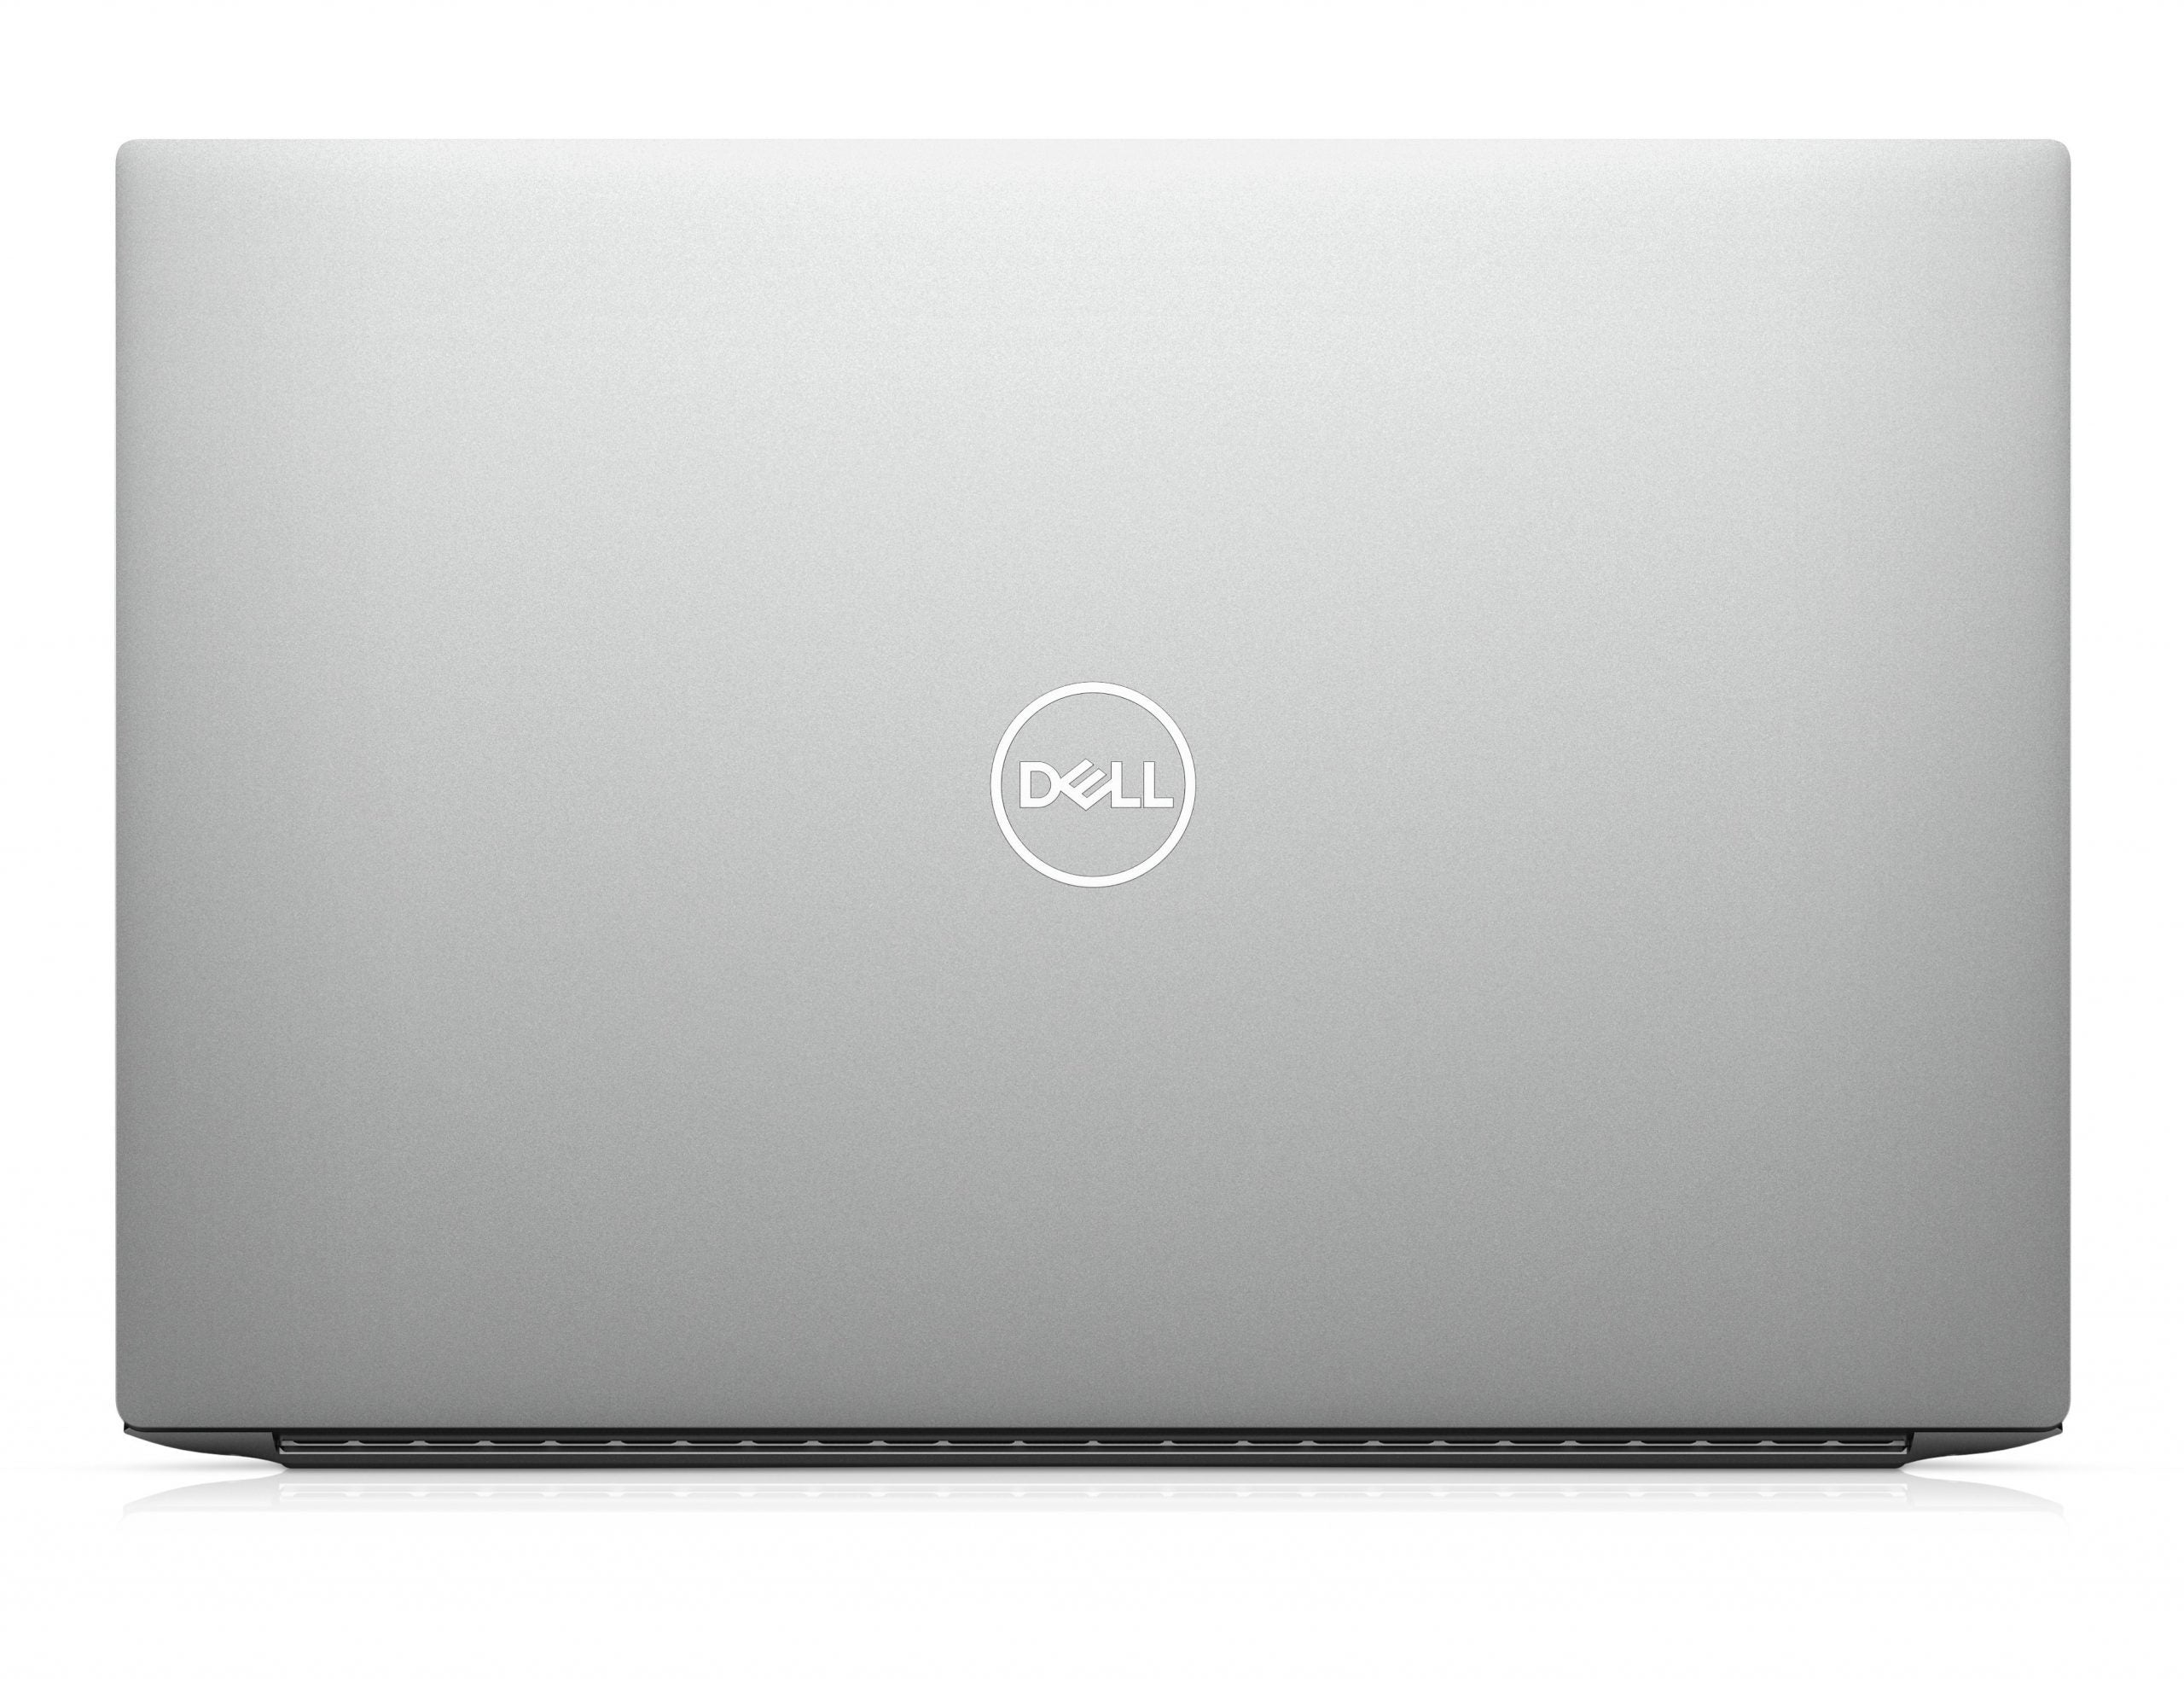 DELL XPS 15 9500 Workstation and gaming notebook 15.6″ Inch 4K | Intel Core i7-10750H 2.6Ghz | Ram 32Gb DDR4 | SSD 1Tb | Nvidia GTX 1650Ti 4Gb | Windows 10 Pro